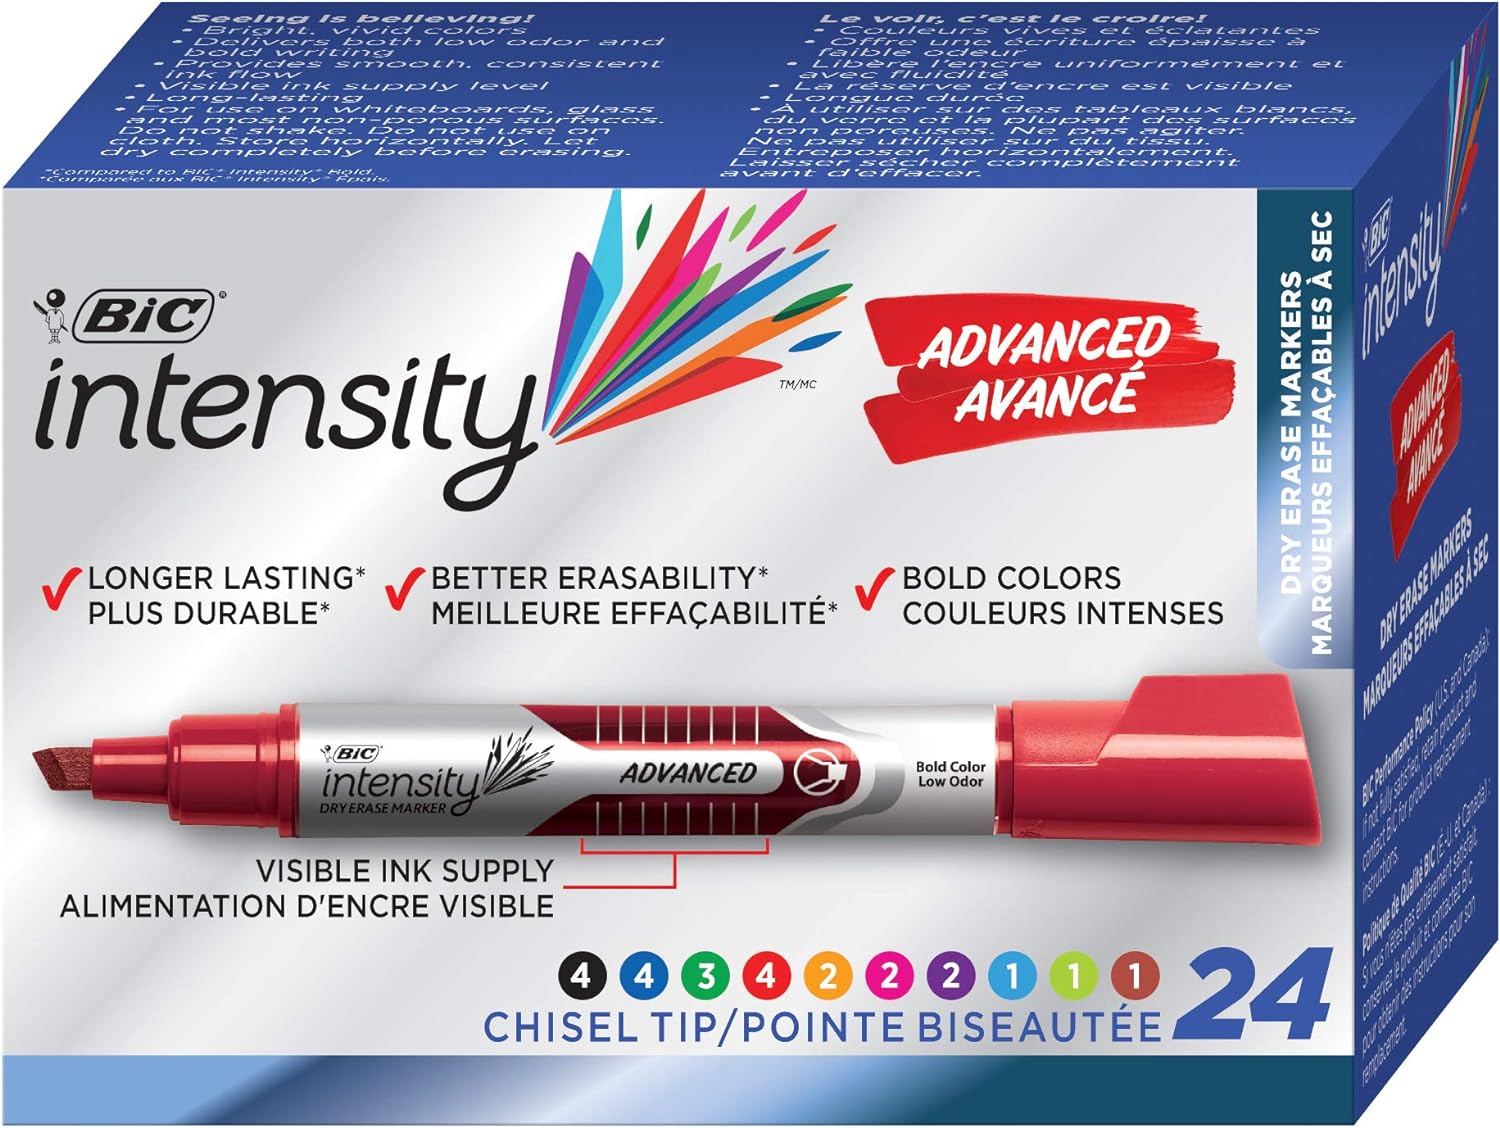 These markers are my favorite. The colors are intense and last until the last drop of ink. Would be a perfect gift for any teacher in your life! They erase cleanly on the first pass and can write a long time. Love the variety in colors